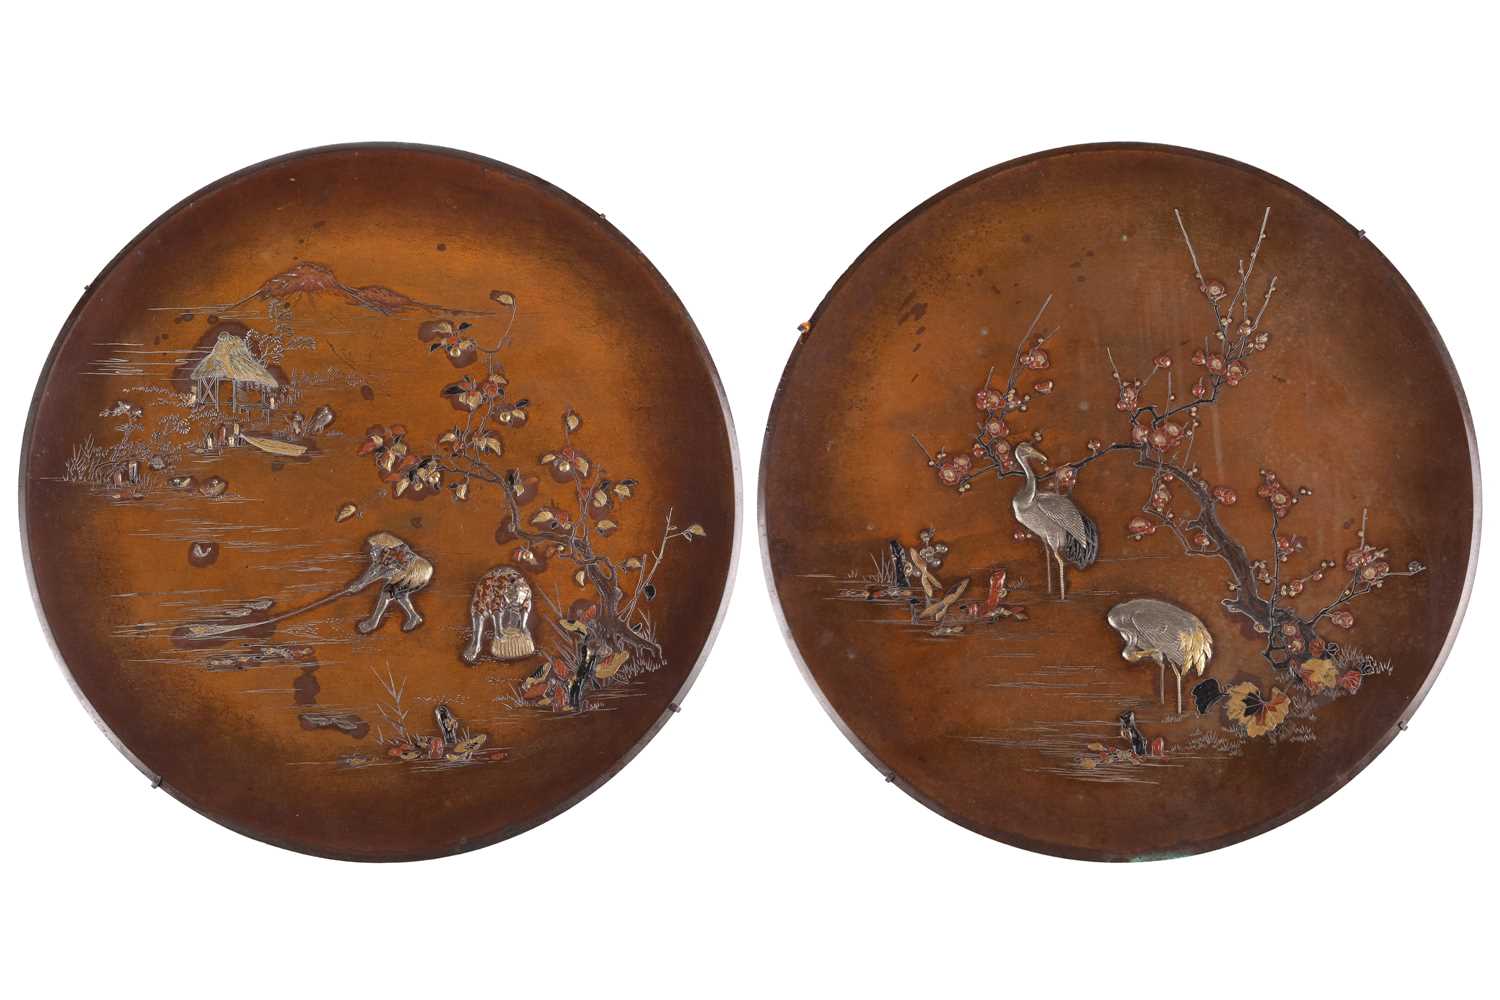 A matched pair of Japanese bronze circular chargers, Meiji Period, late 19th century, decorated with